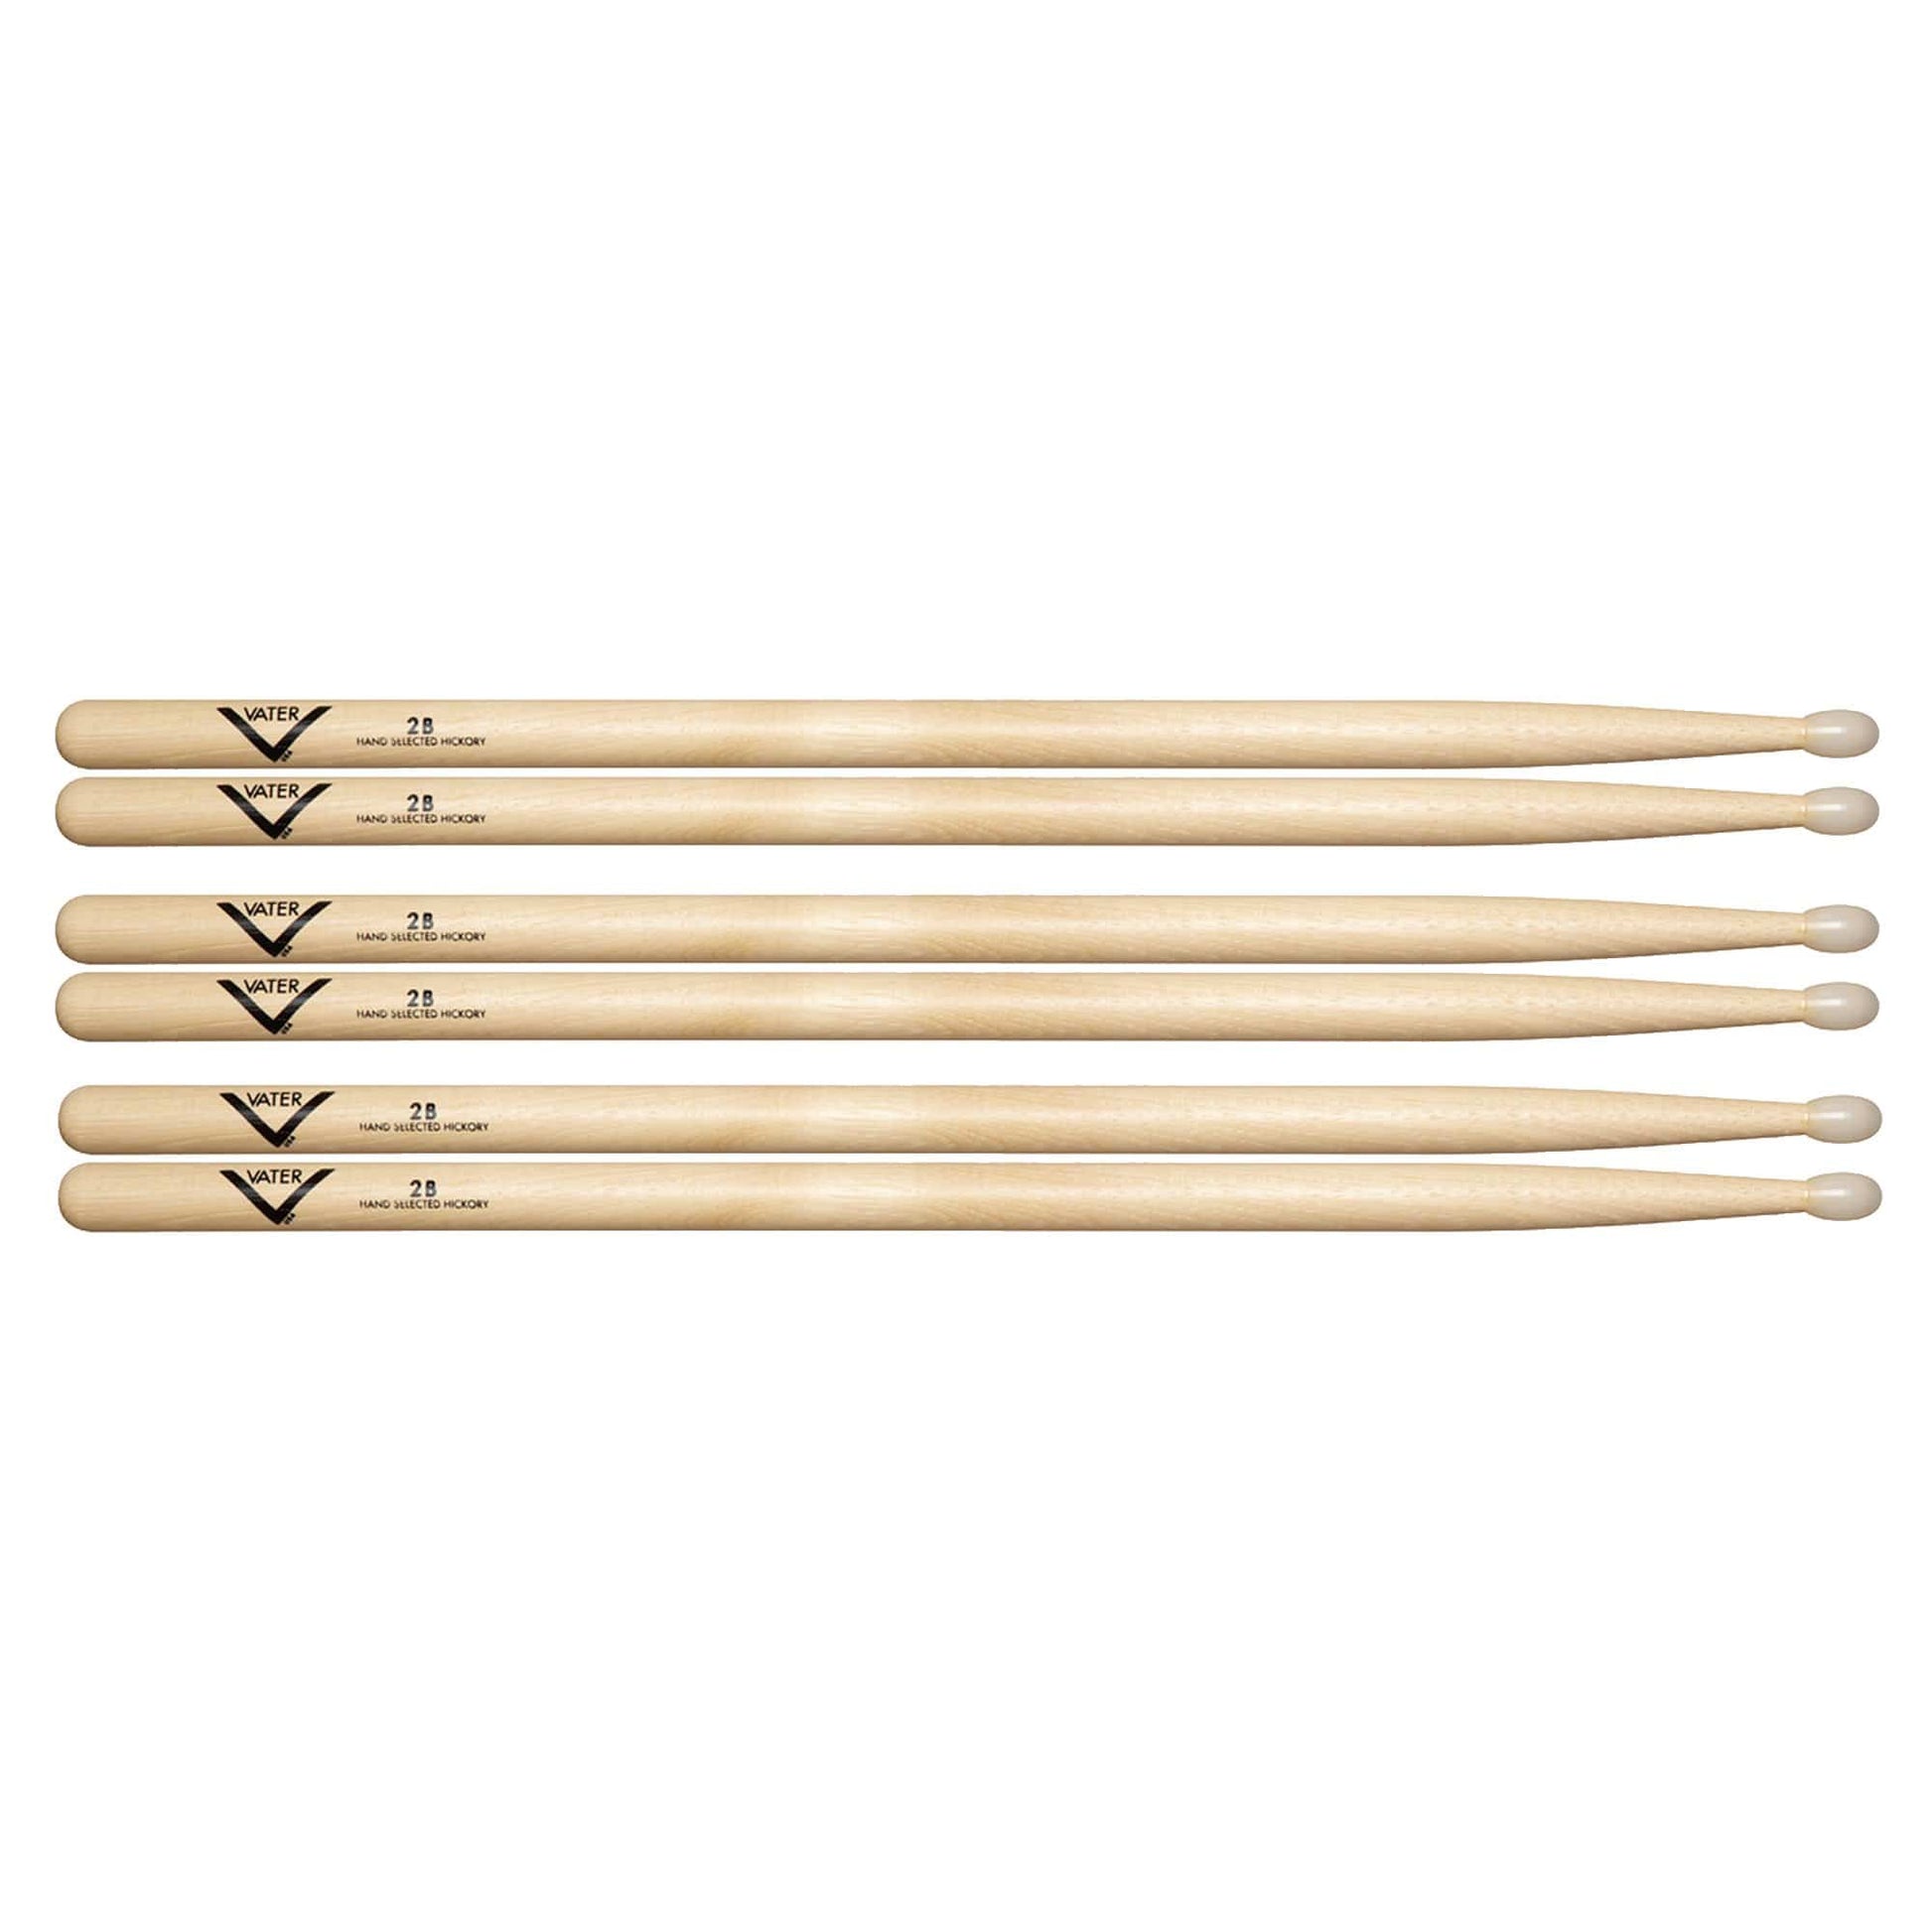 Vater Hickory 2B Nylon Tip Drum Sticks (3 Pair Bundle) Drums and Percussion / Parts and Accessories / Drum Sticks and Mallets